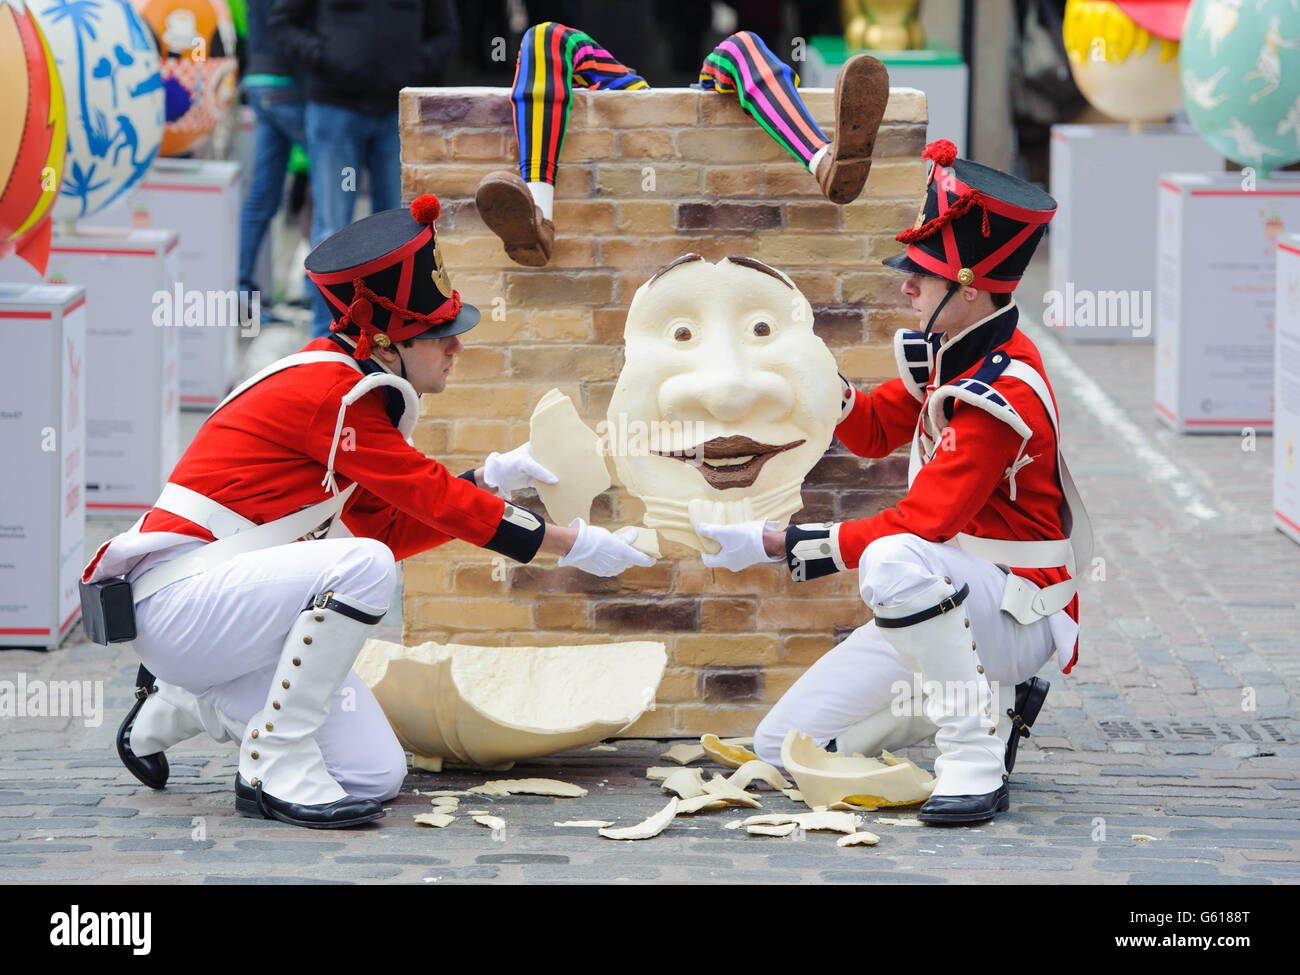 Christian Ward (left) and Kevin Kemp dressed as soldiers examine the remains of a shattered 4ft tall Humpty Dumpty style Easter egg in Covent Garden, central London, as part of the Lindt Big Egg Hunt supporting children's charity Action for Children. Stock Photo